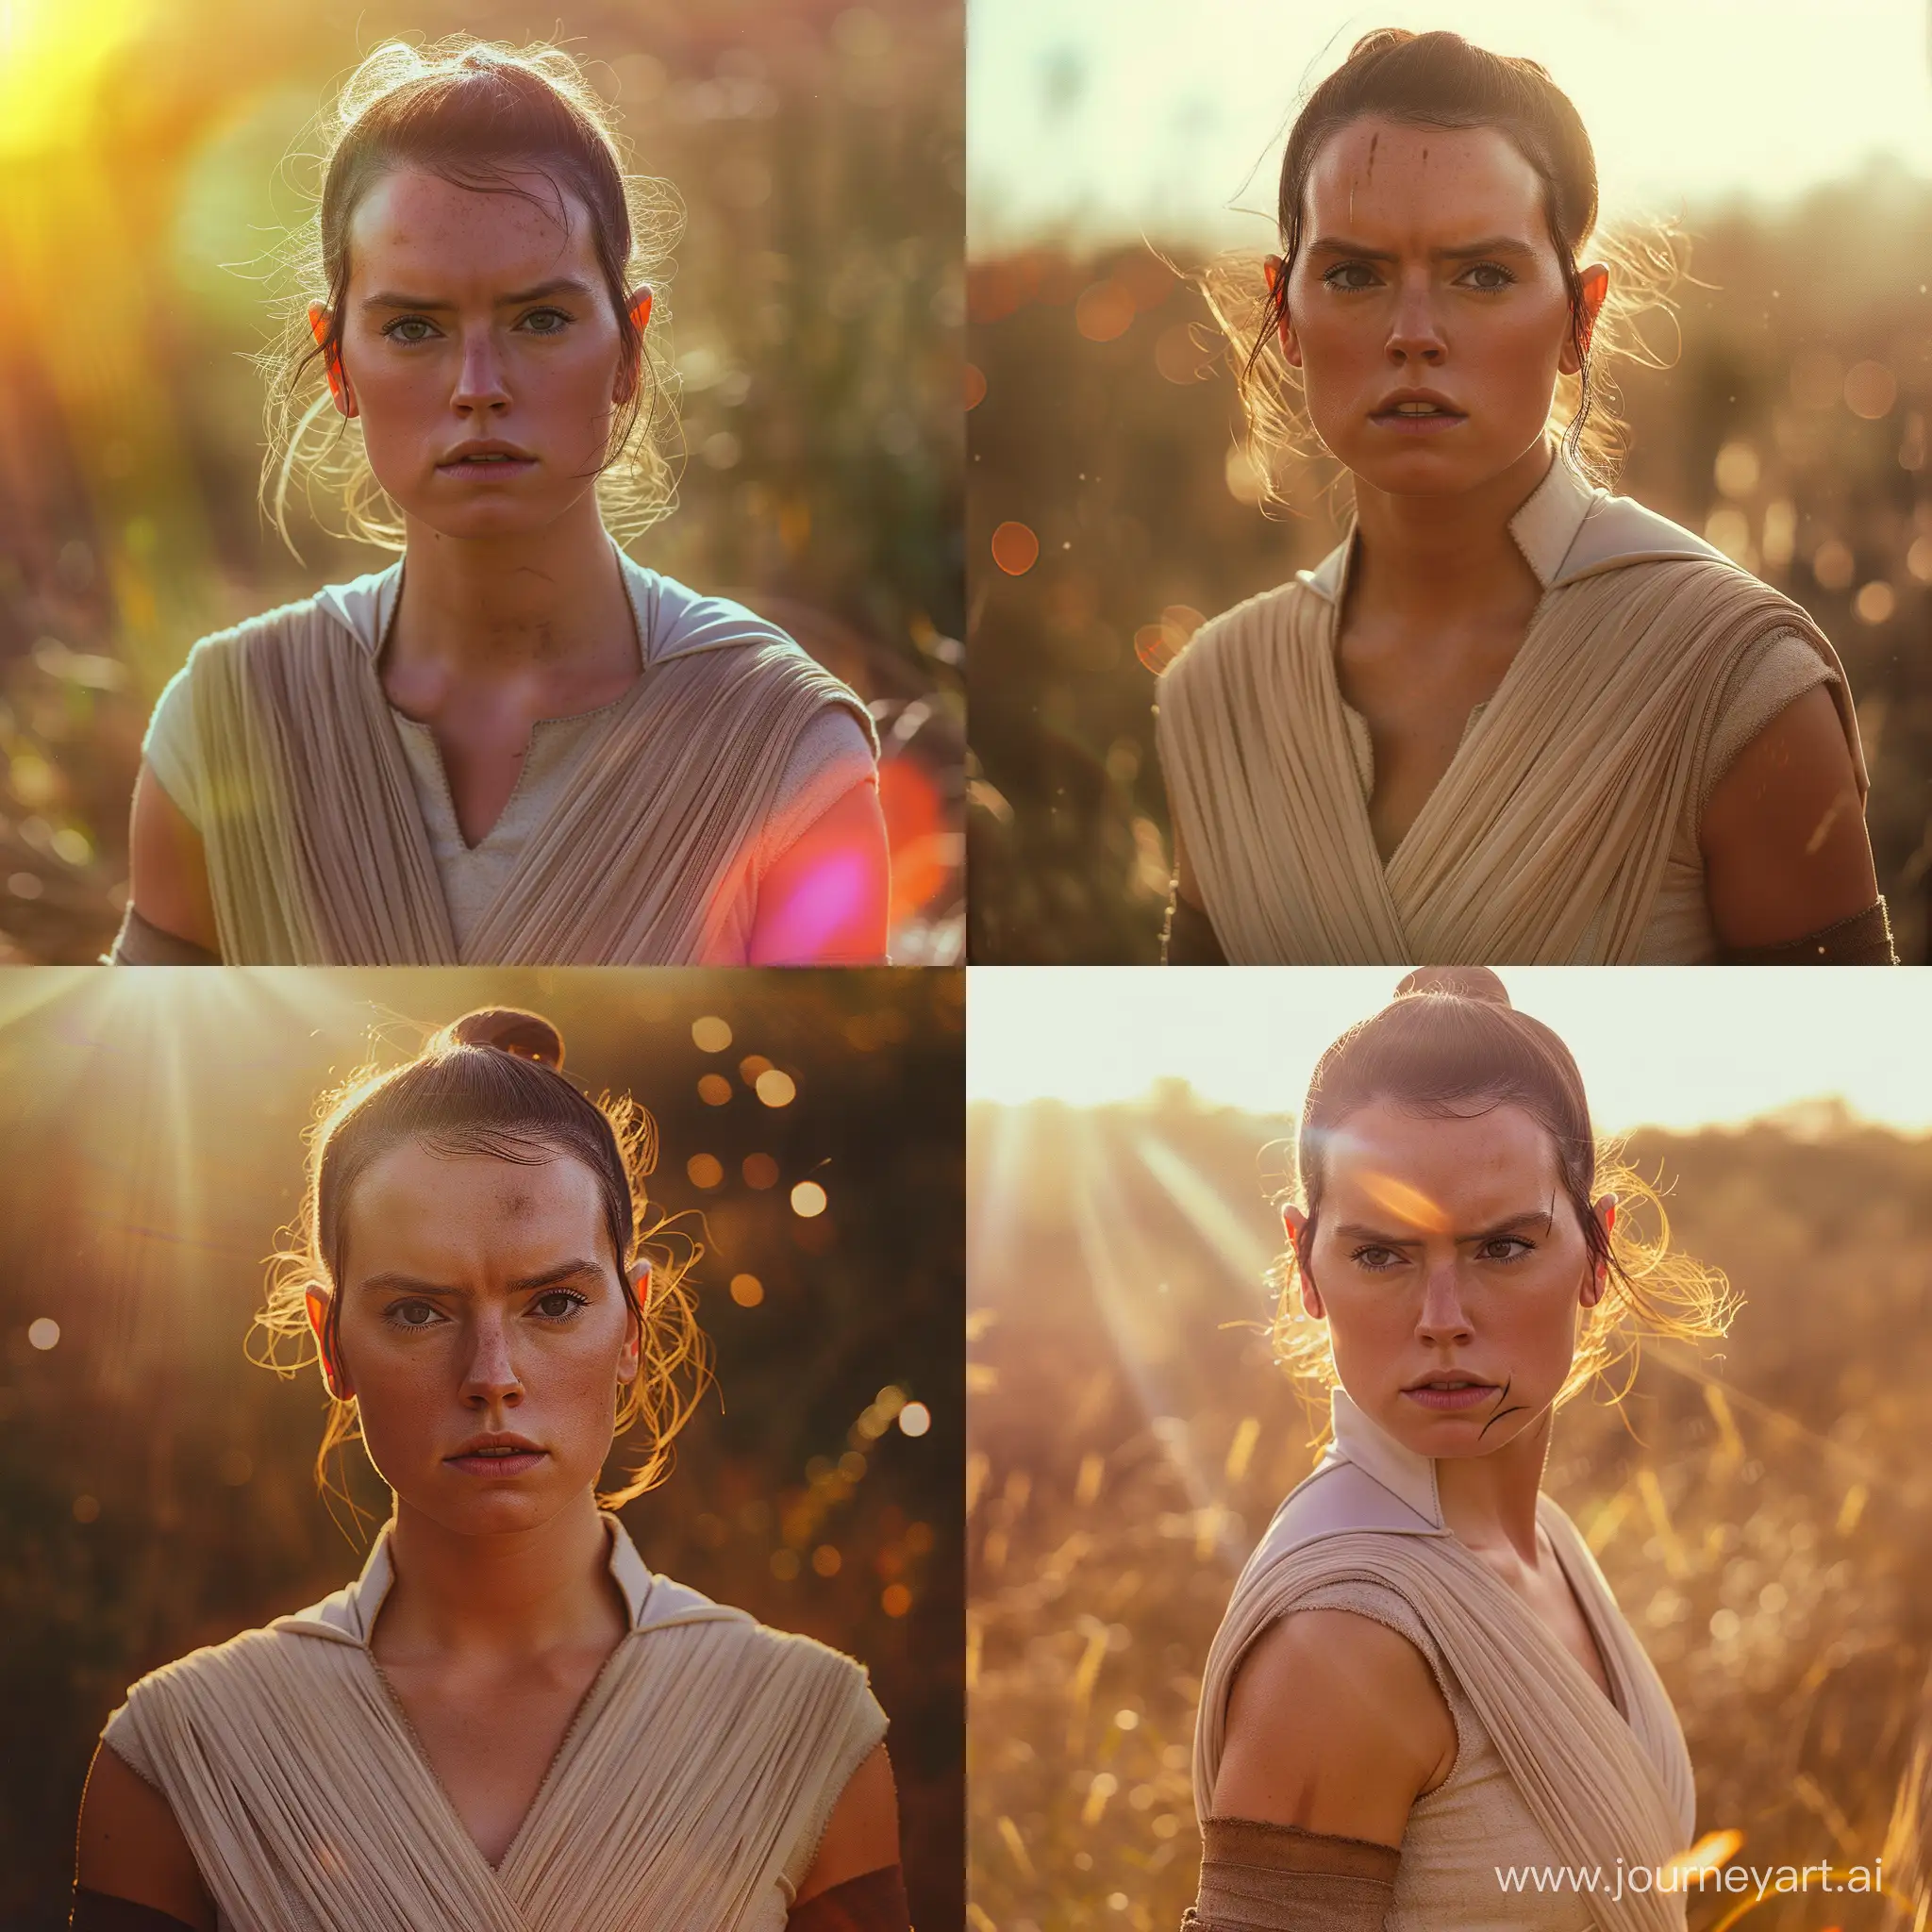 Rey from Star Wars (Daisy Ridley) full body photo of skswoman, furled brow, outdoors, a magic portal to a parallel dimension, landscape with Warm Colors, analog style, look at viewer, skin texture, close up, cinematic light, sidelighting, Fujiflim XT3, DSLR, 50mm with some lens flares and more cinematic lens flares and even more lens flares